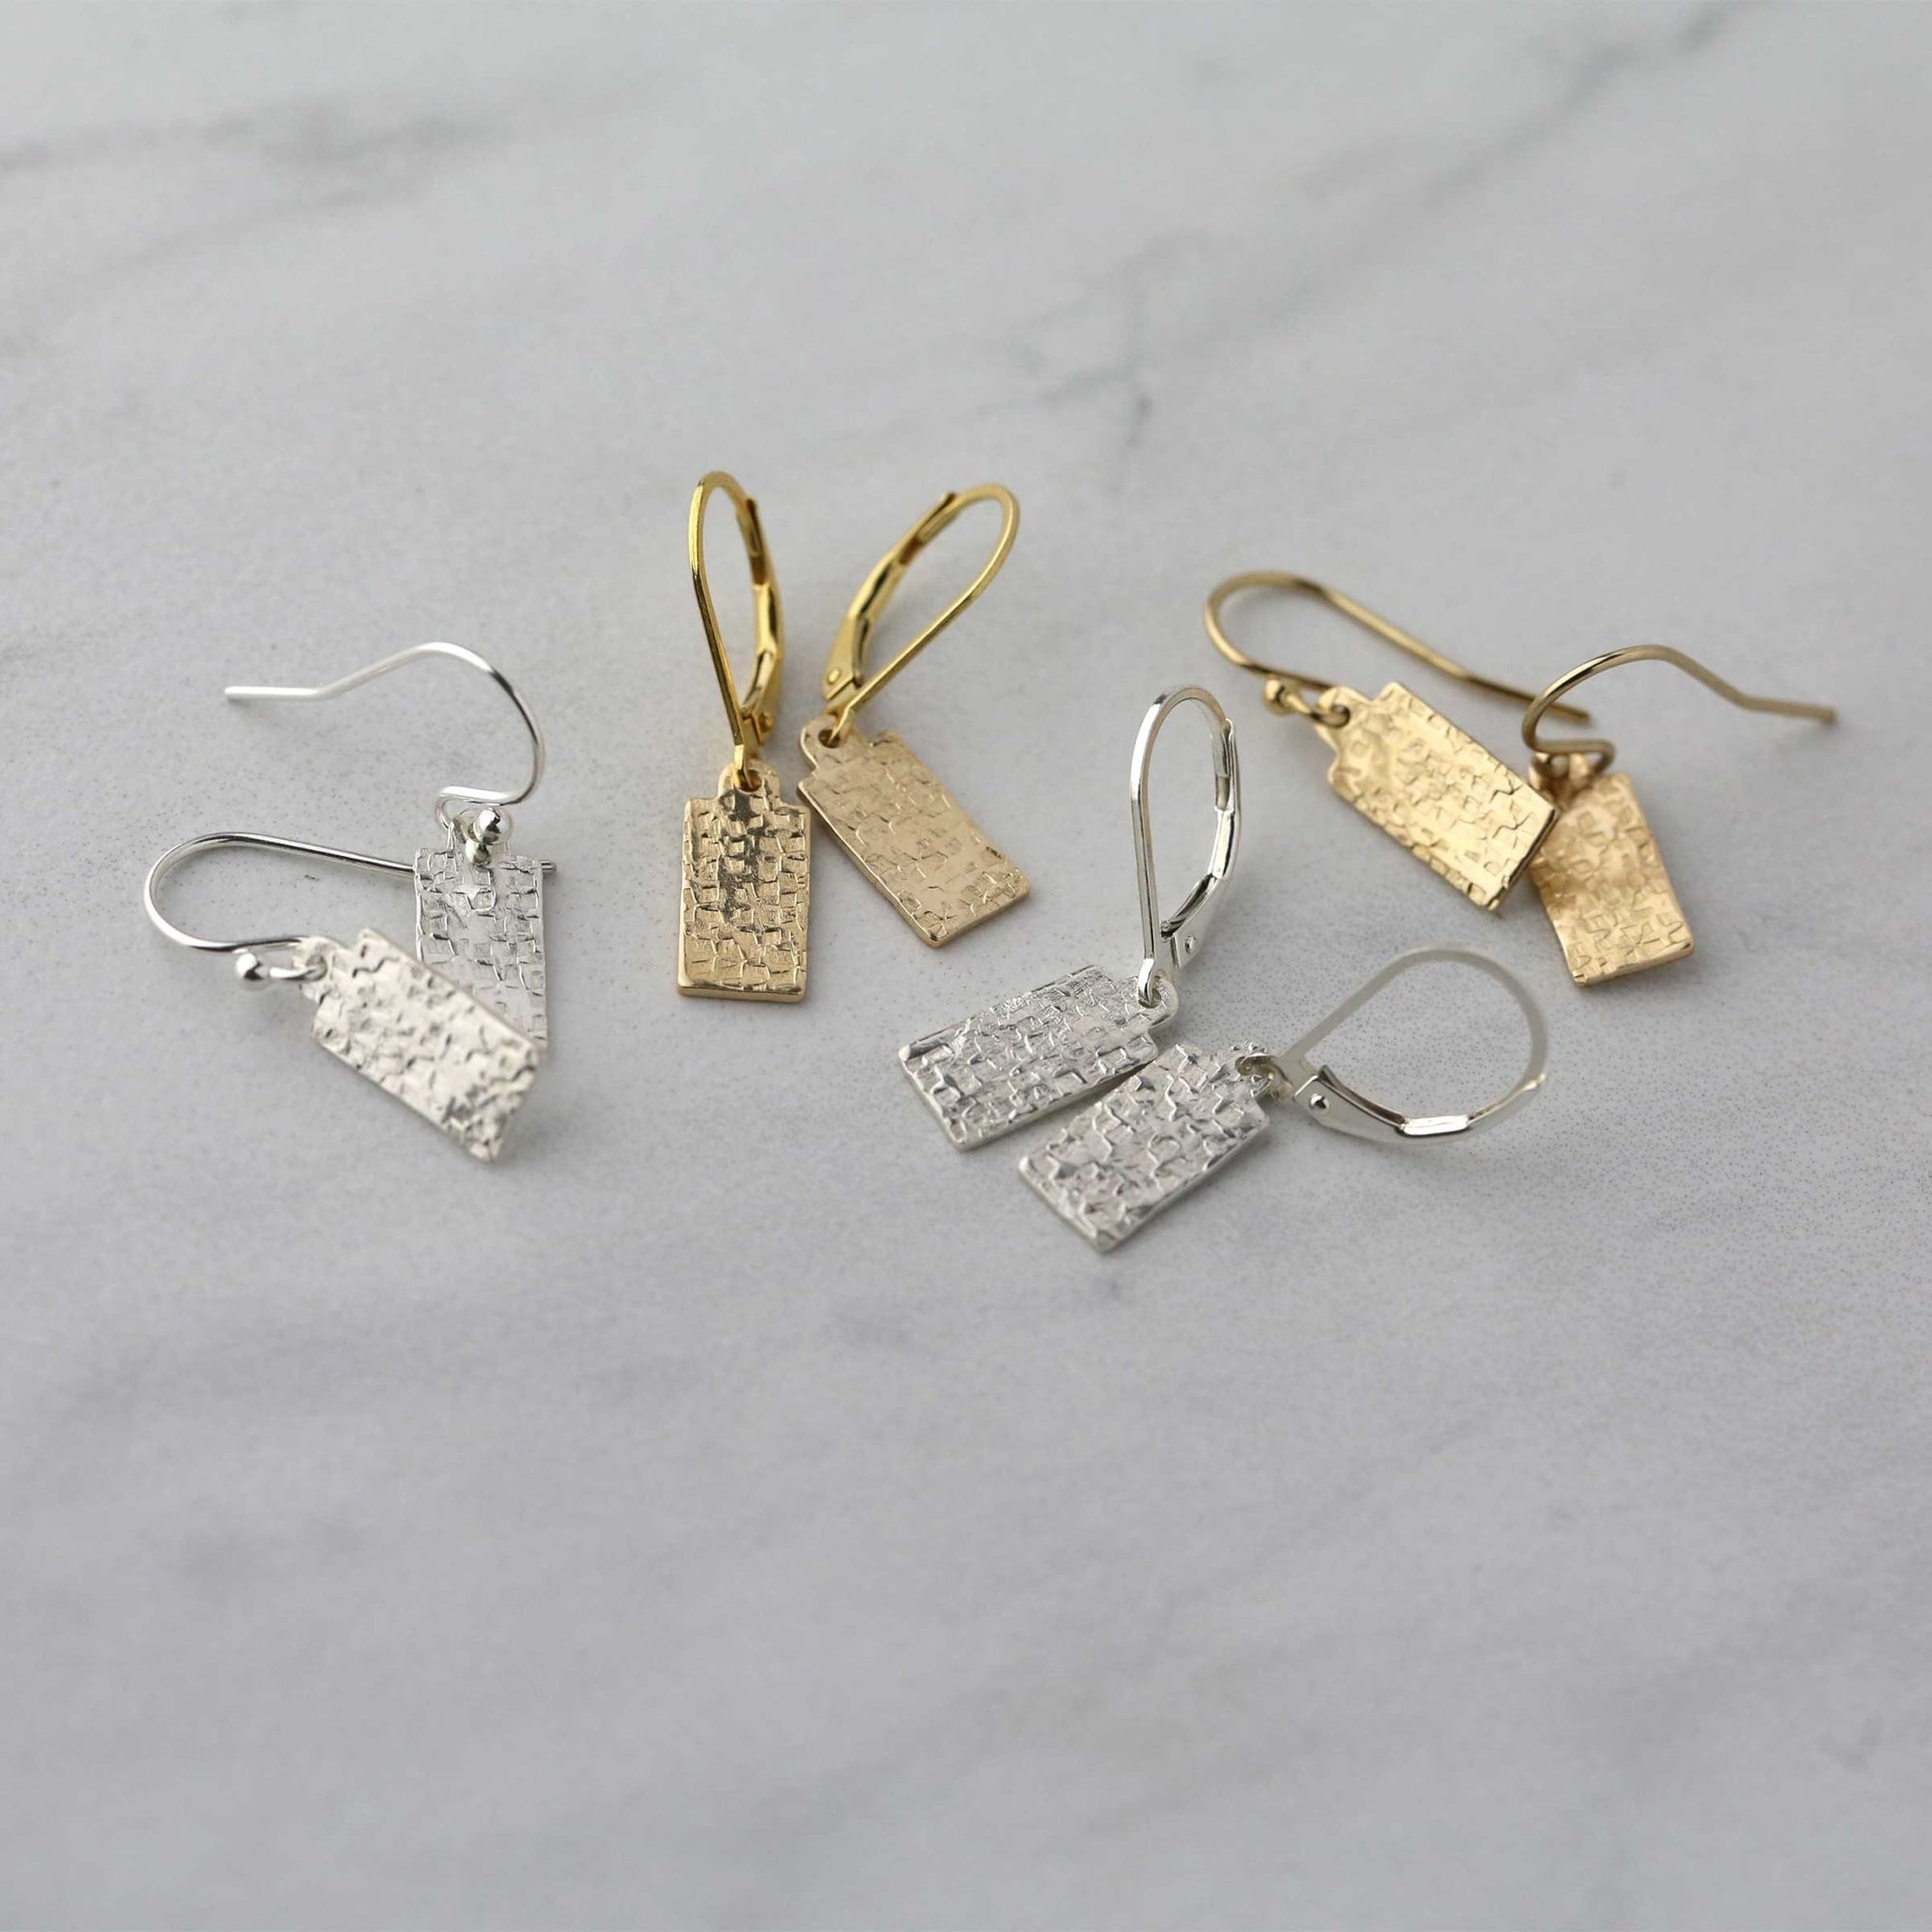 Textured Tag Earrings